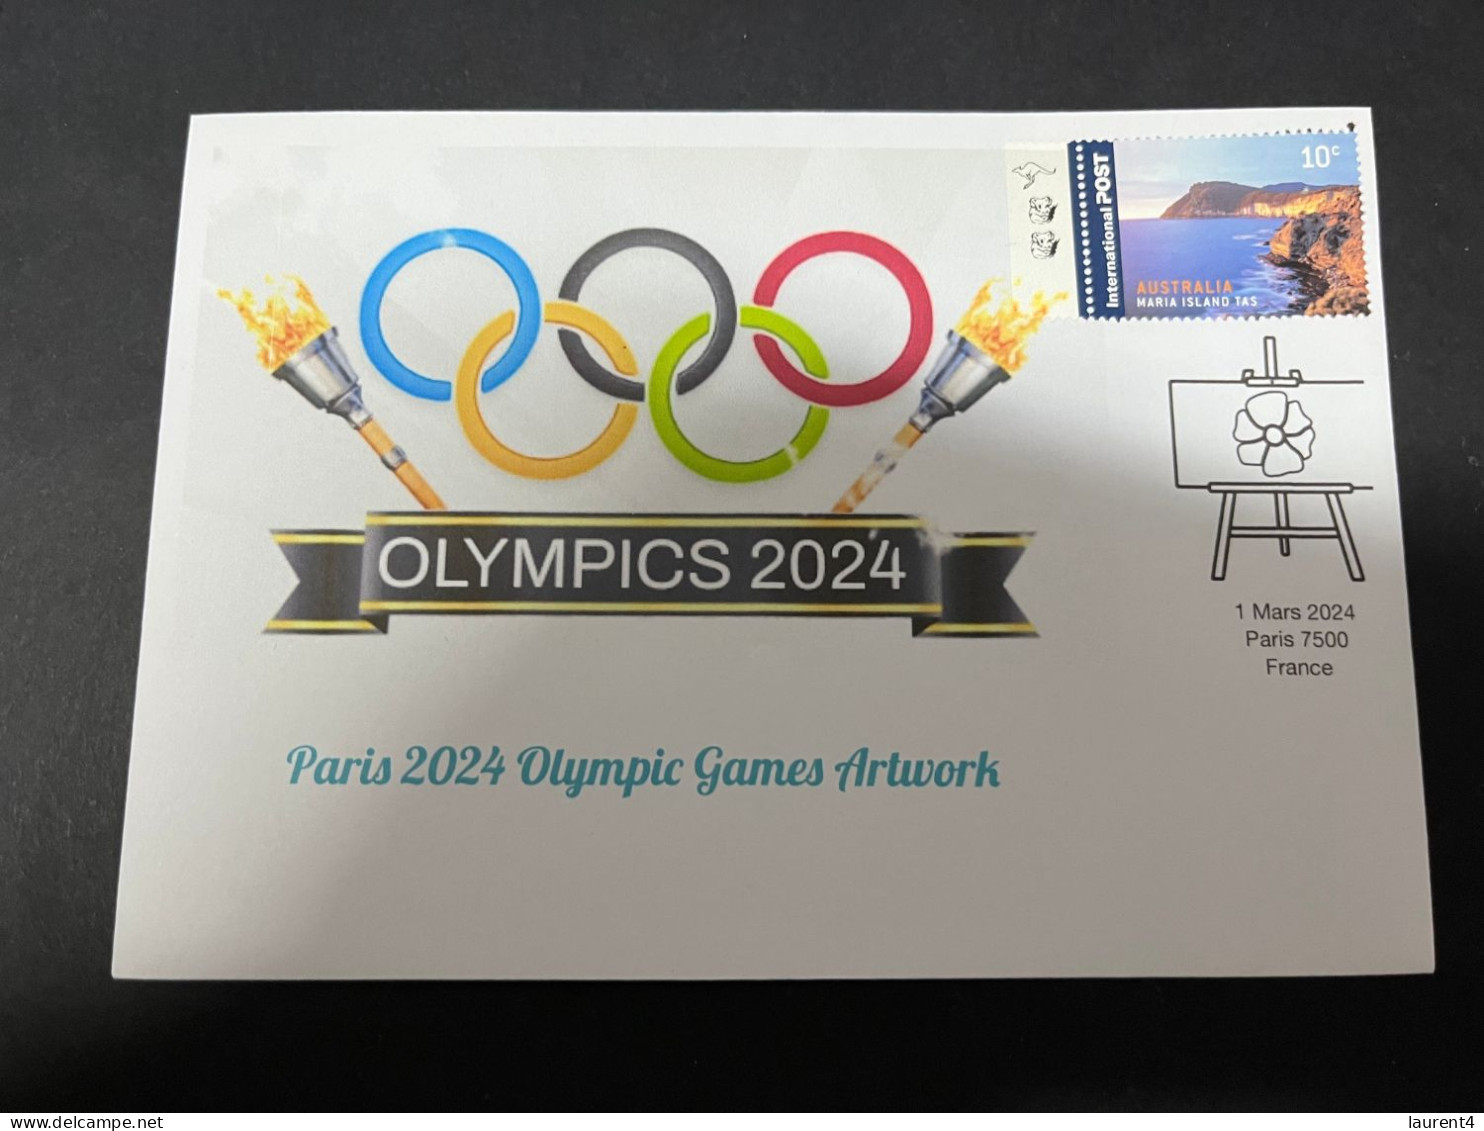 11-3-2024 (2 Y 43) Paris Olympic Games 2024 - 8 (of 12 Covers Series) For The Paris 2024 Olympic Games Artwork - Summer 2024: Paris